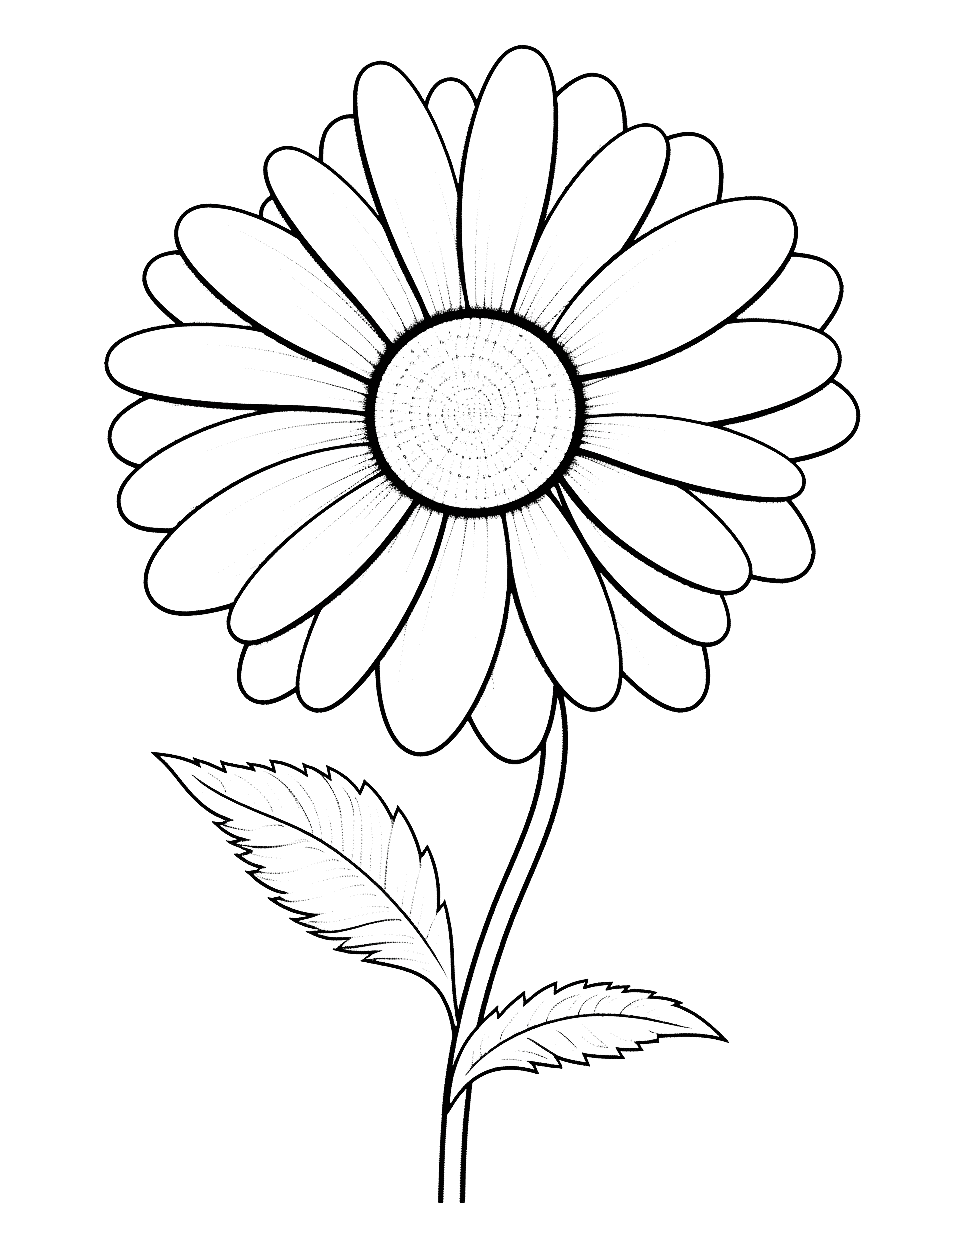 Difficult Daisy Flower Coloring Page - A detailed, complex daisy design for advanced colorists.